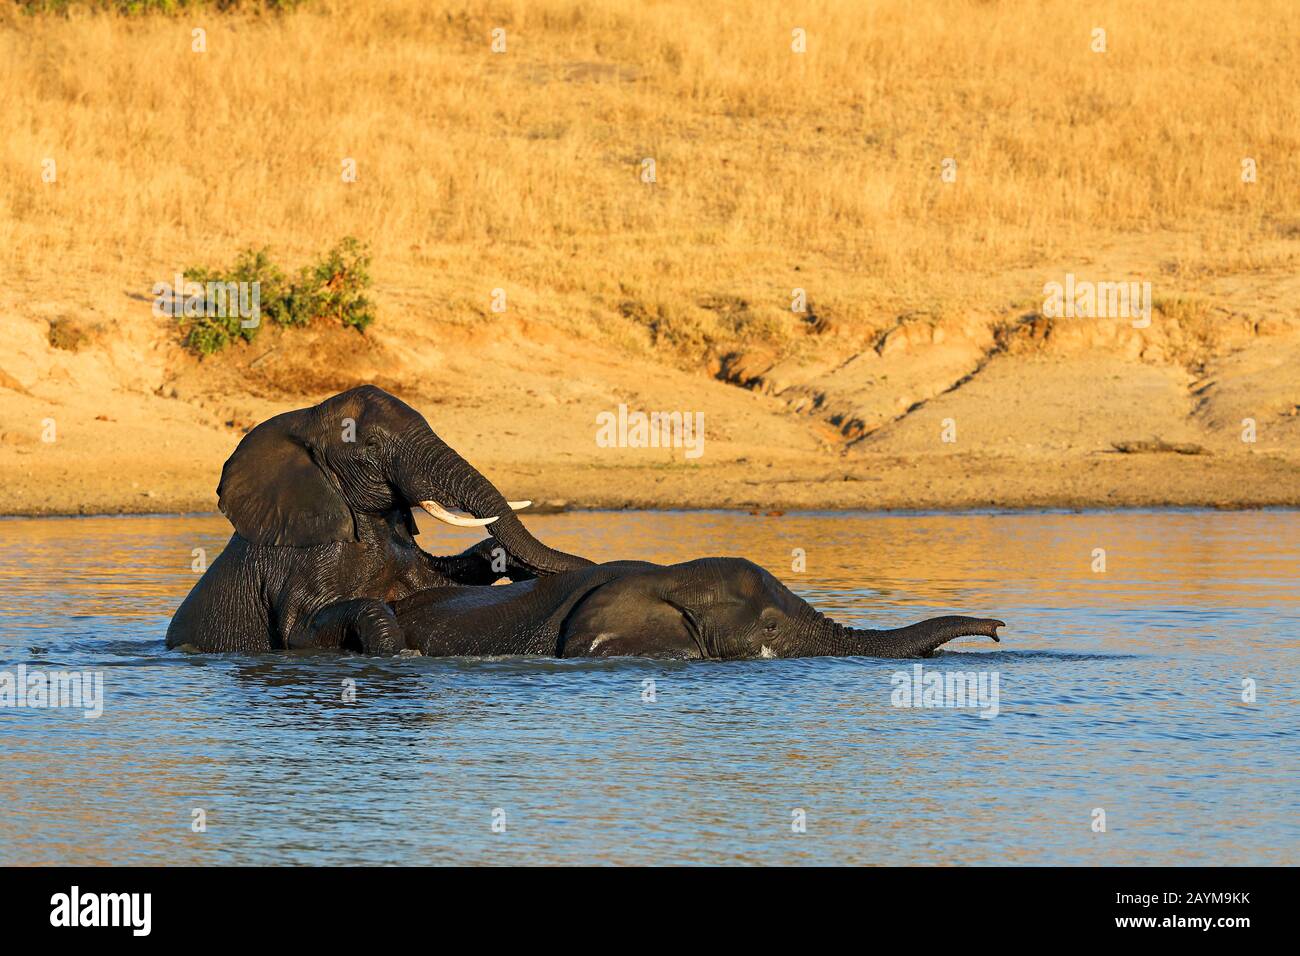 African elephant (Loxodonta africana), two elephants play in the water, South Africa, Kwazulu-Natal, Mkhuze Game Reserve Stock Photo